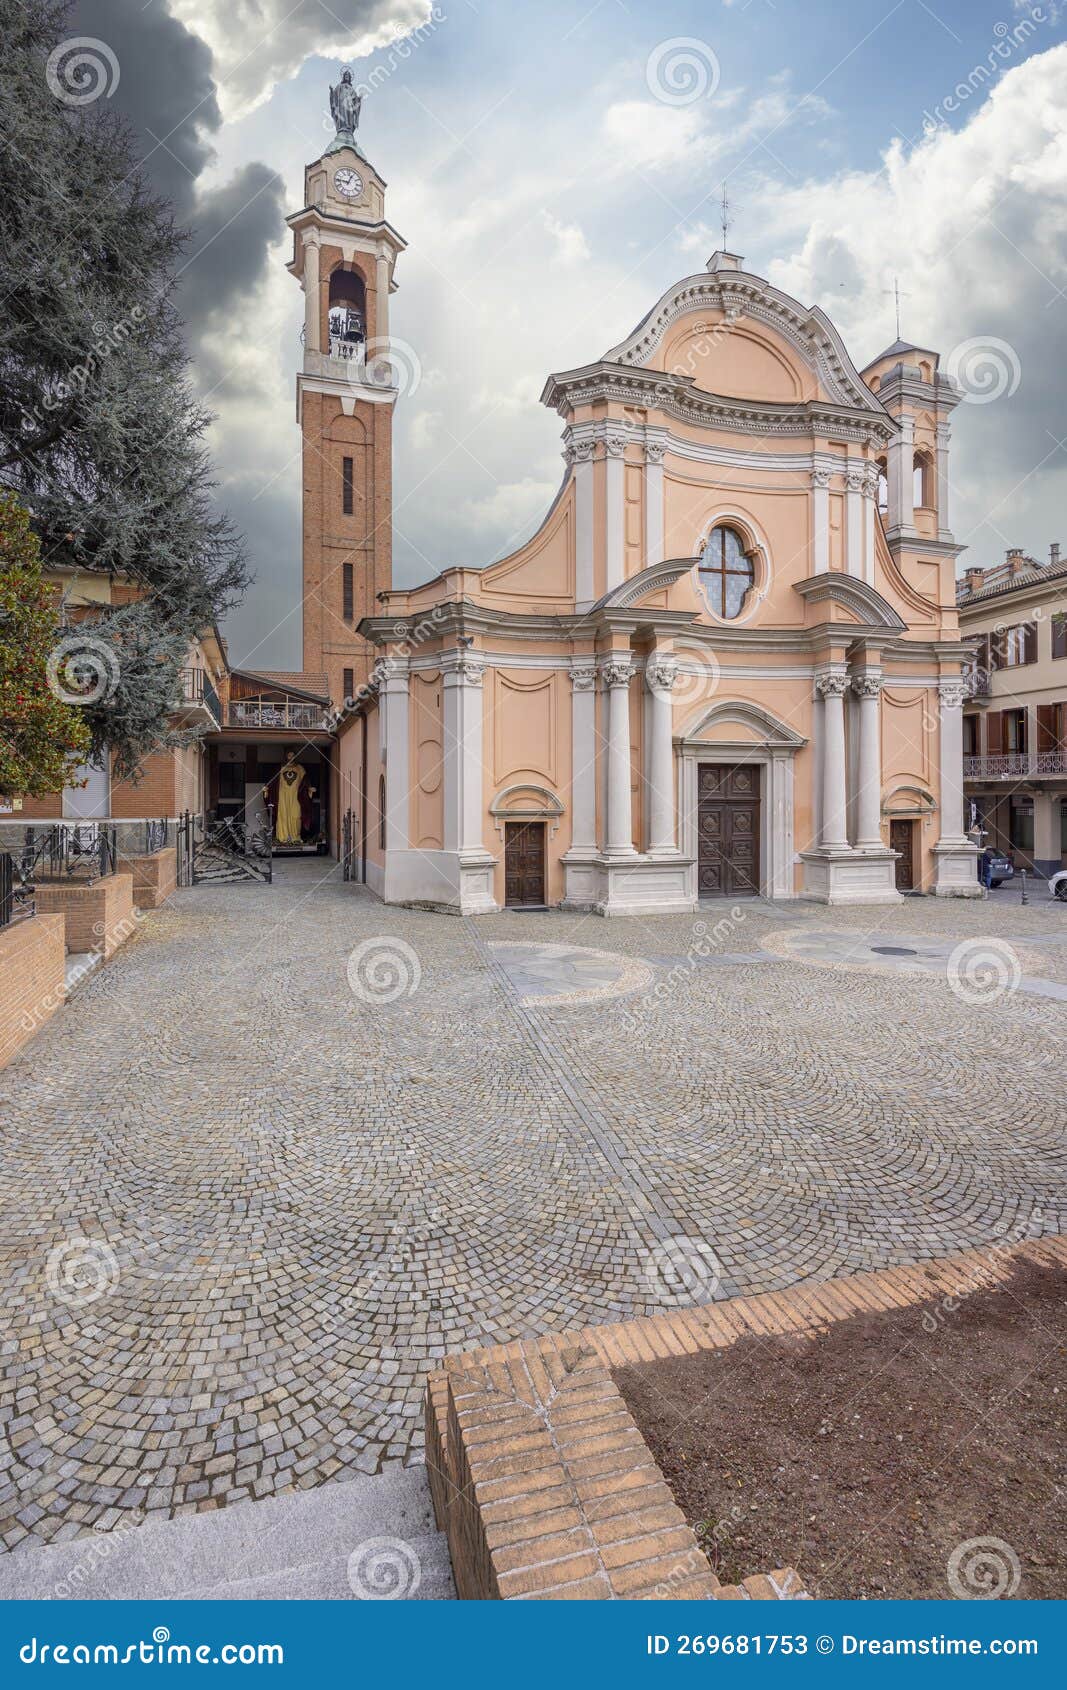 san vittore church, canale, piedmont, italy